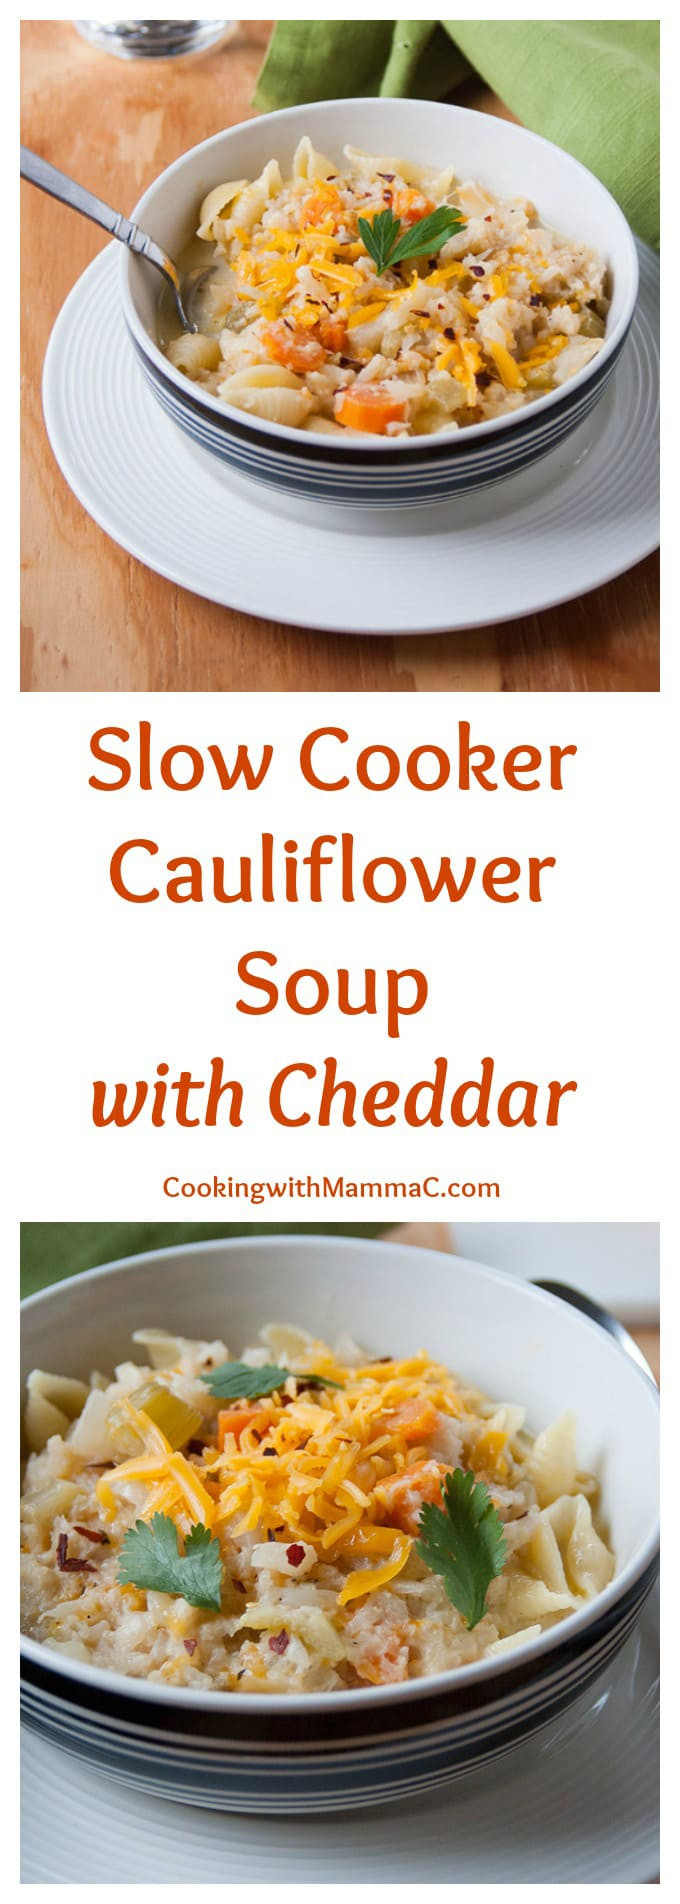 Slow Cooker Cauliflower
 Slow Cooker Cauliflower Soup with Cheddar